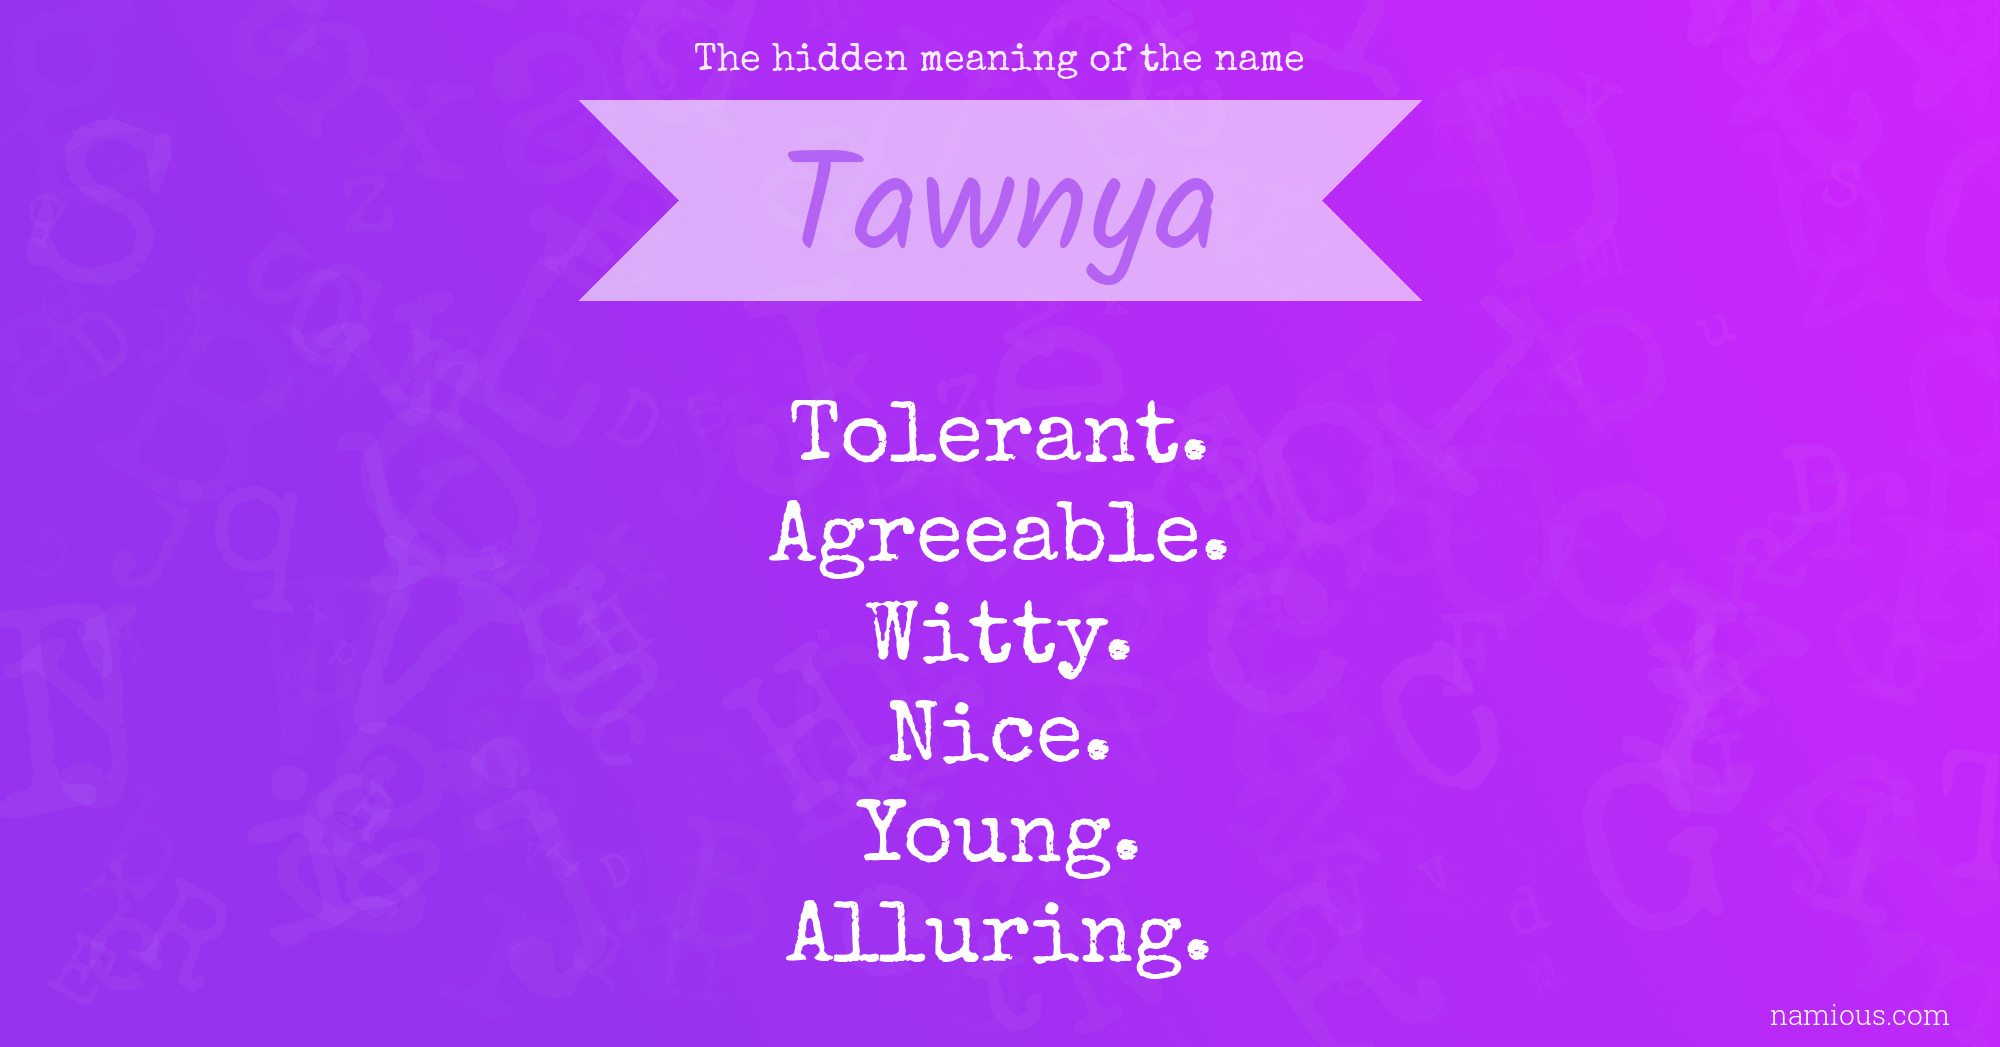 The hidden meaning of the name Tawnya